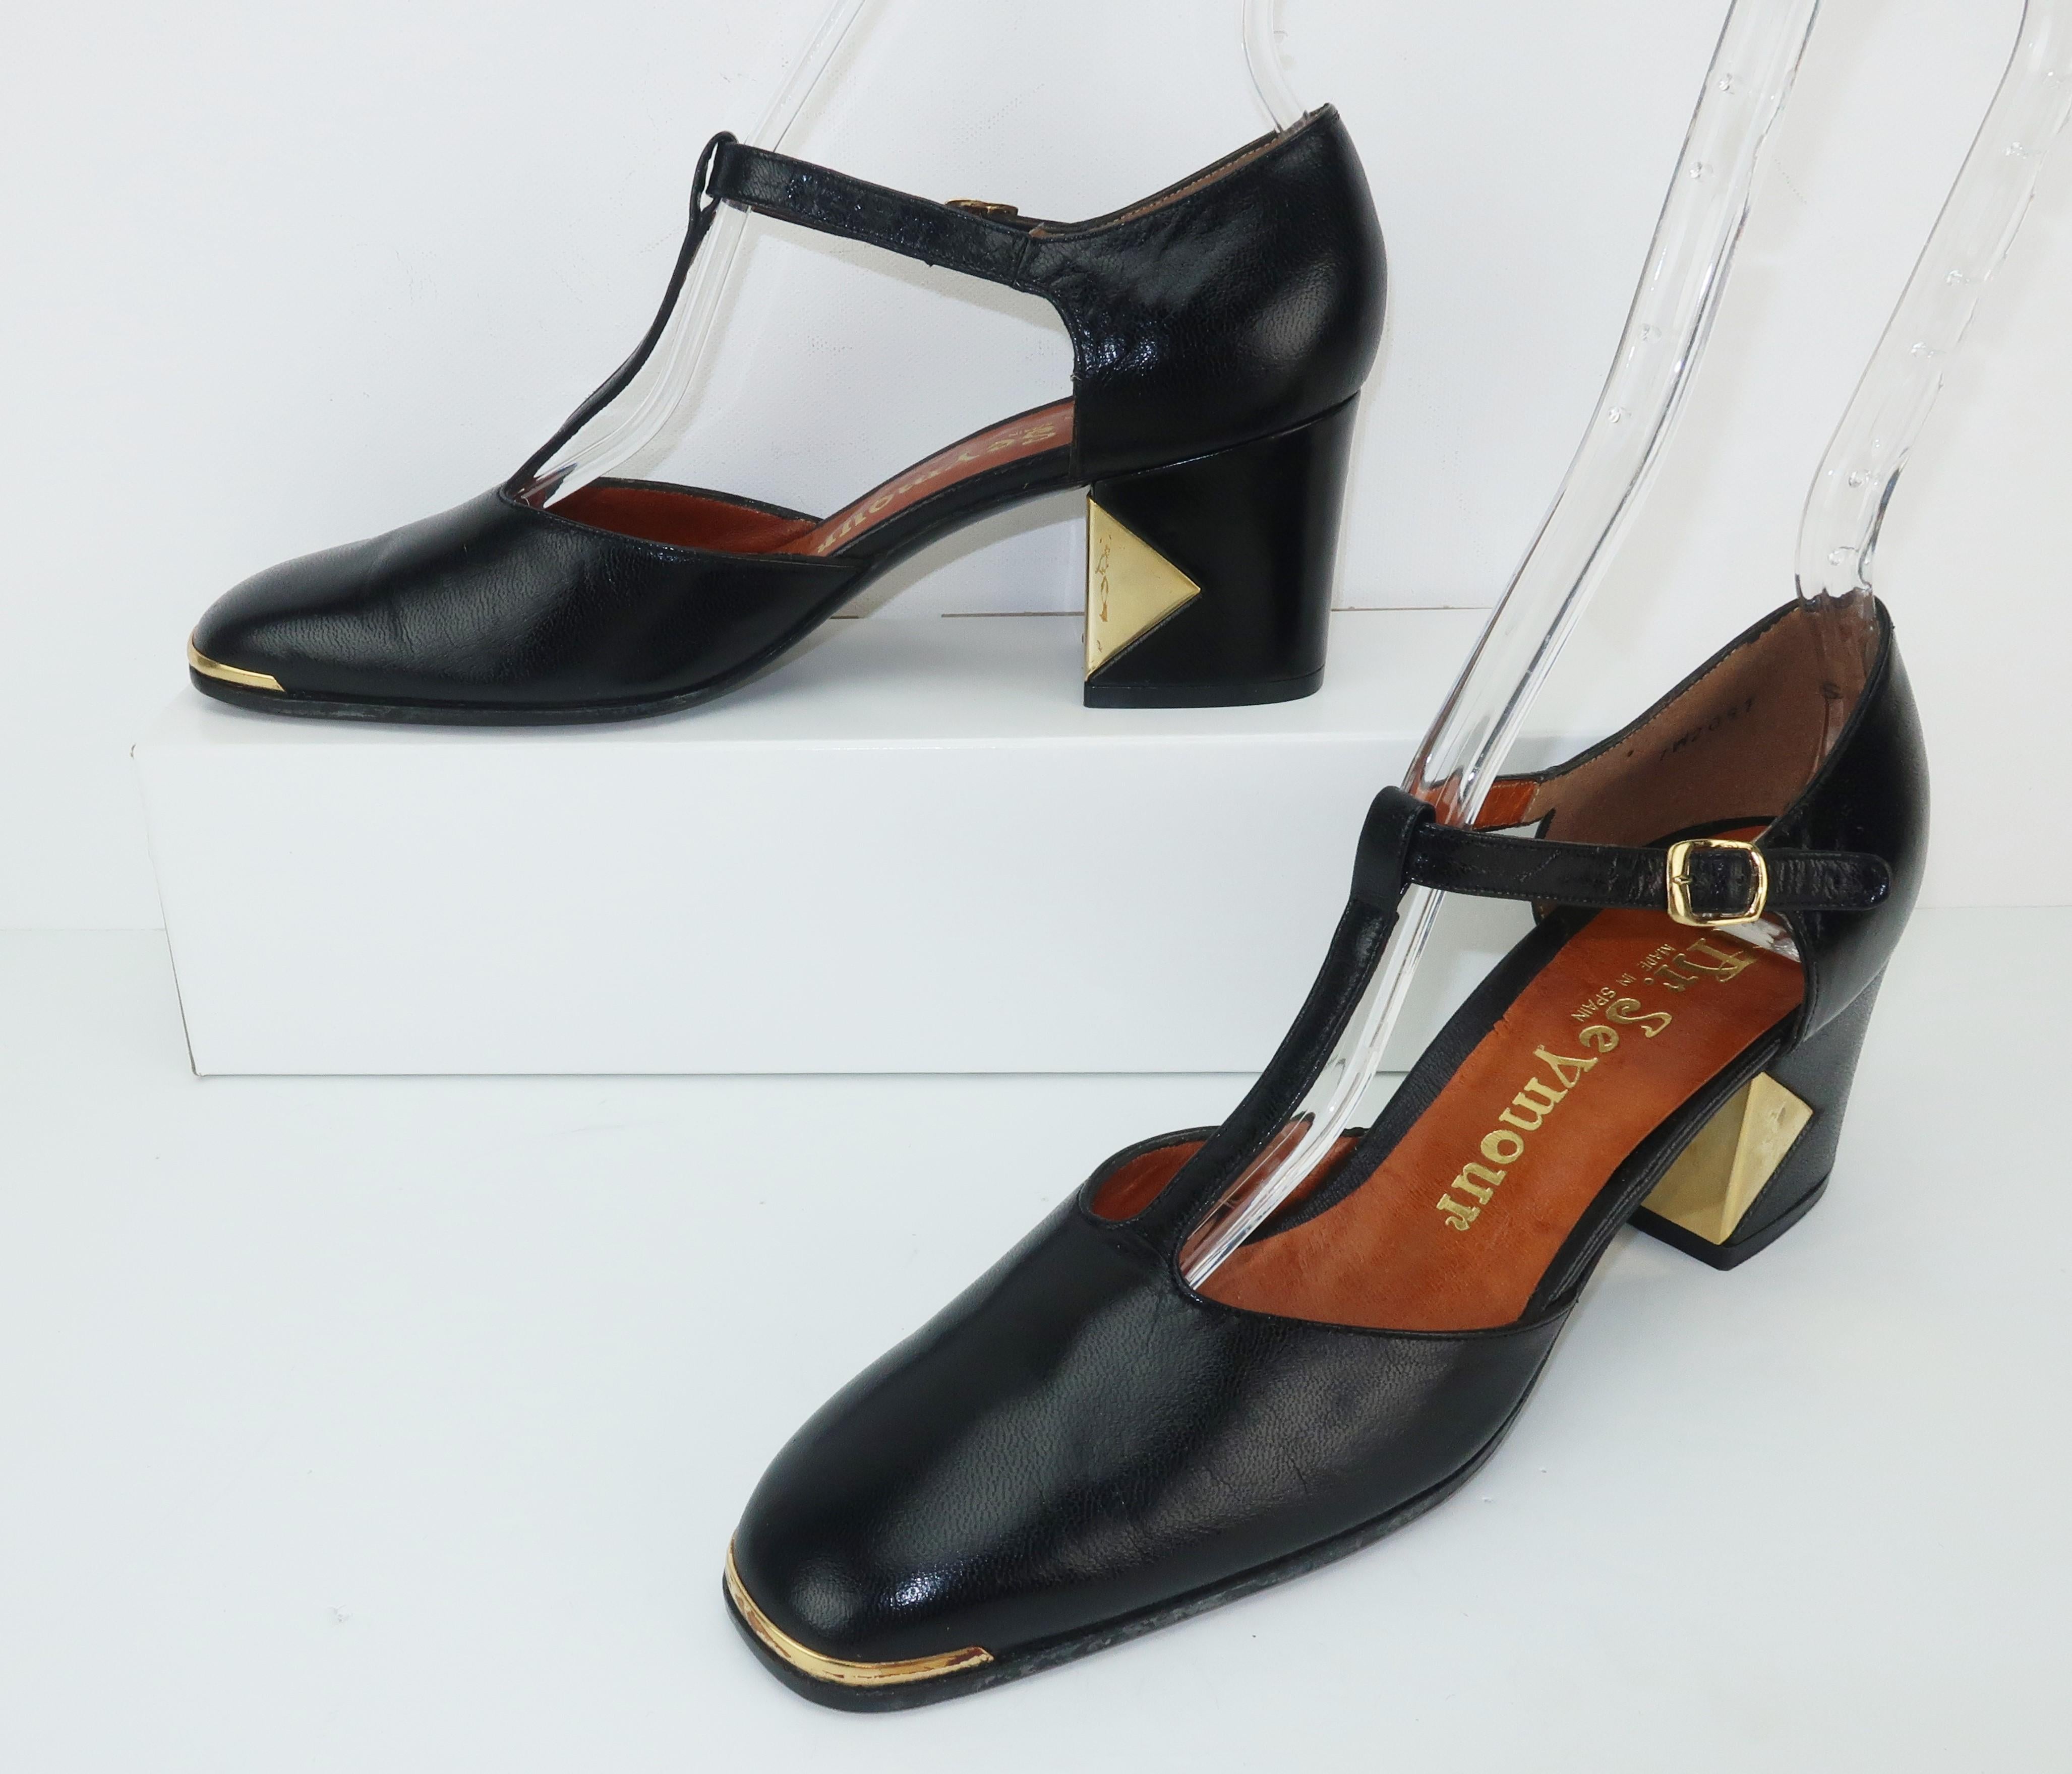 The gold metal details on these 1970's black leather Mr. Seymour shoes really updates the look of a classic t-strap and provides a chic mod aesthetic to the design.  Mr. Seymour was founded by Seymour Weitzman, Stuart Weitzman's father, in the